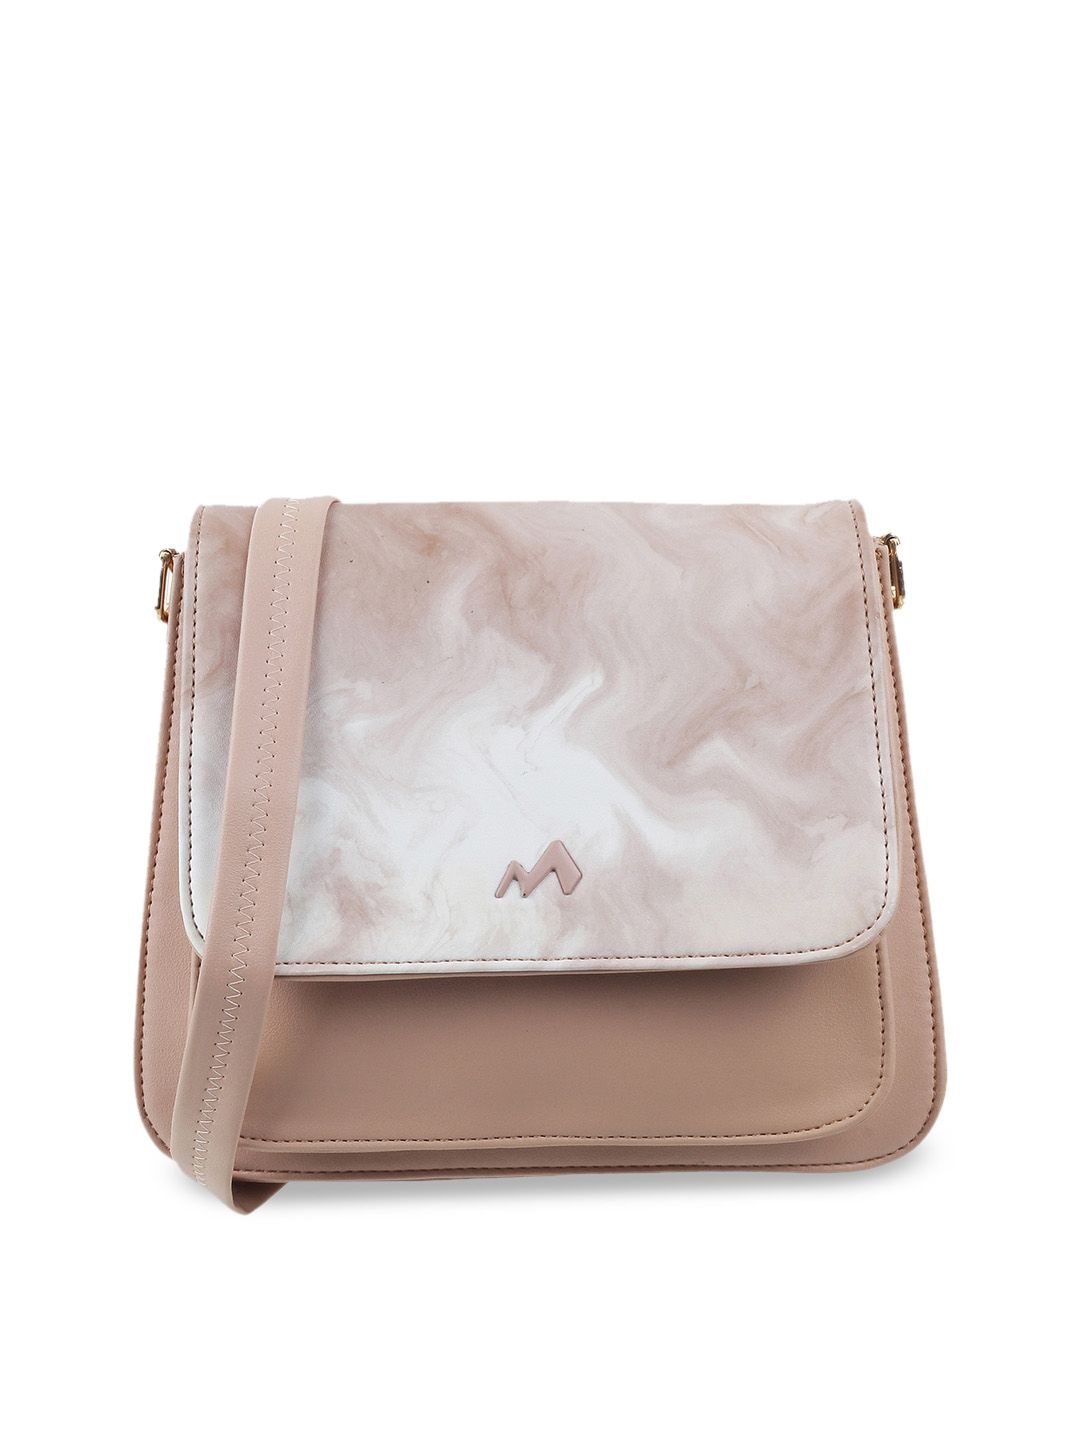 Metro Beige PU Structured Shoulder Bag with Tasselled Price in India